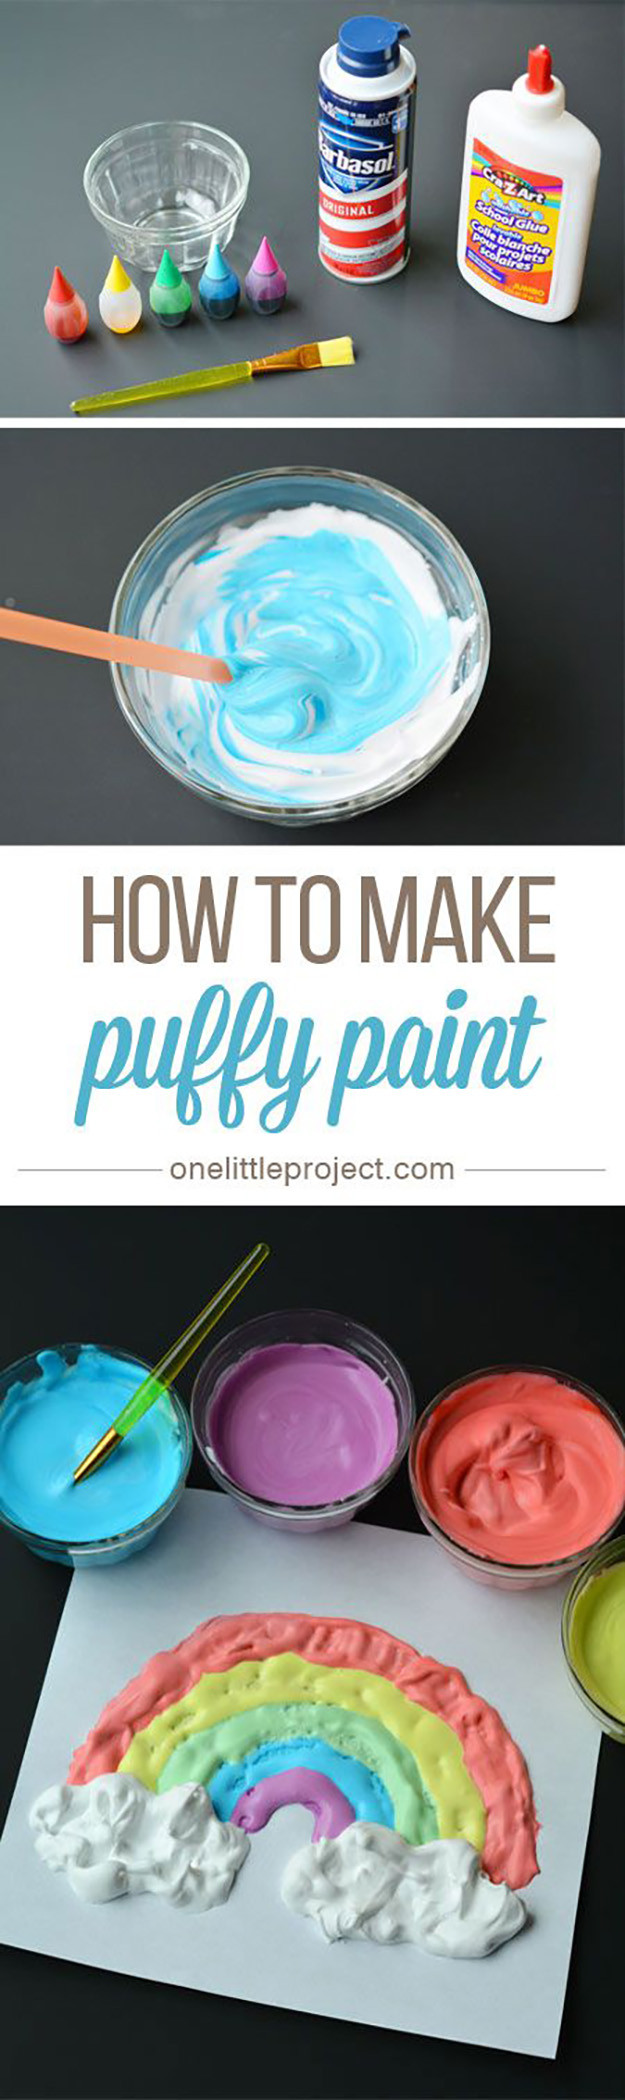 DIY Paint For Kids
 21 DIY Paint Recipes To Make For the Kids